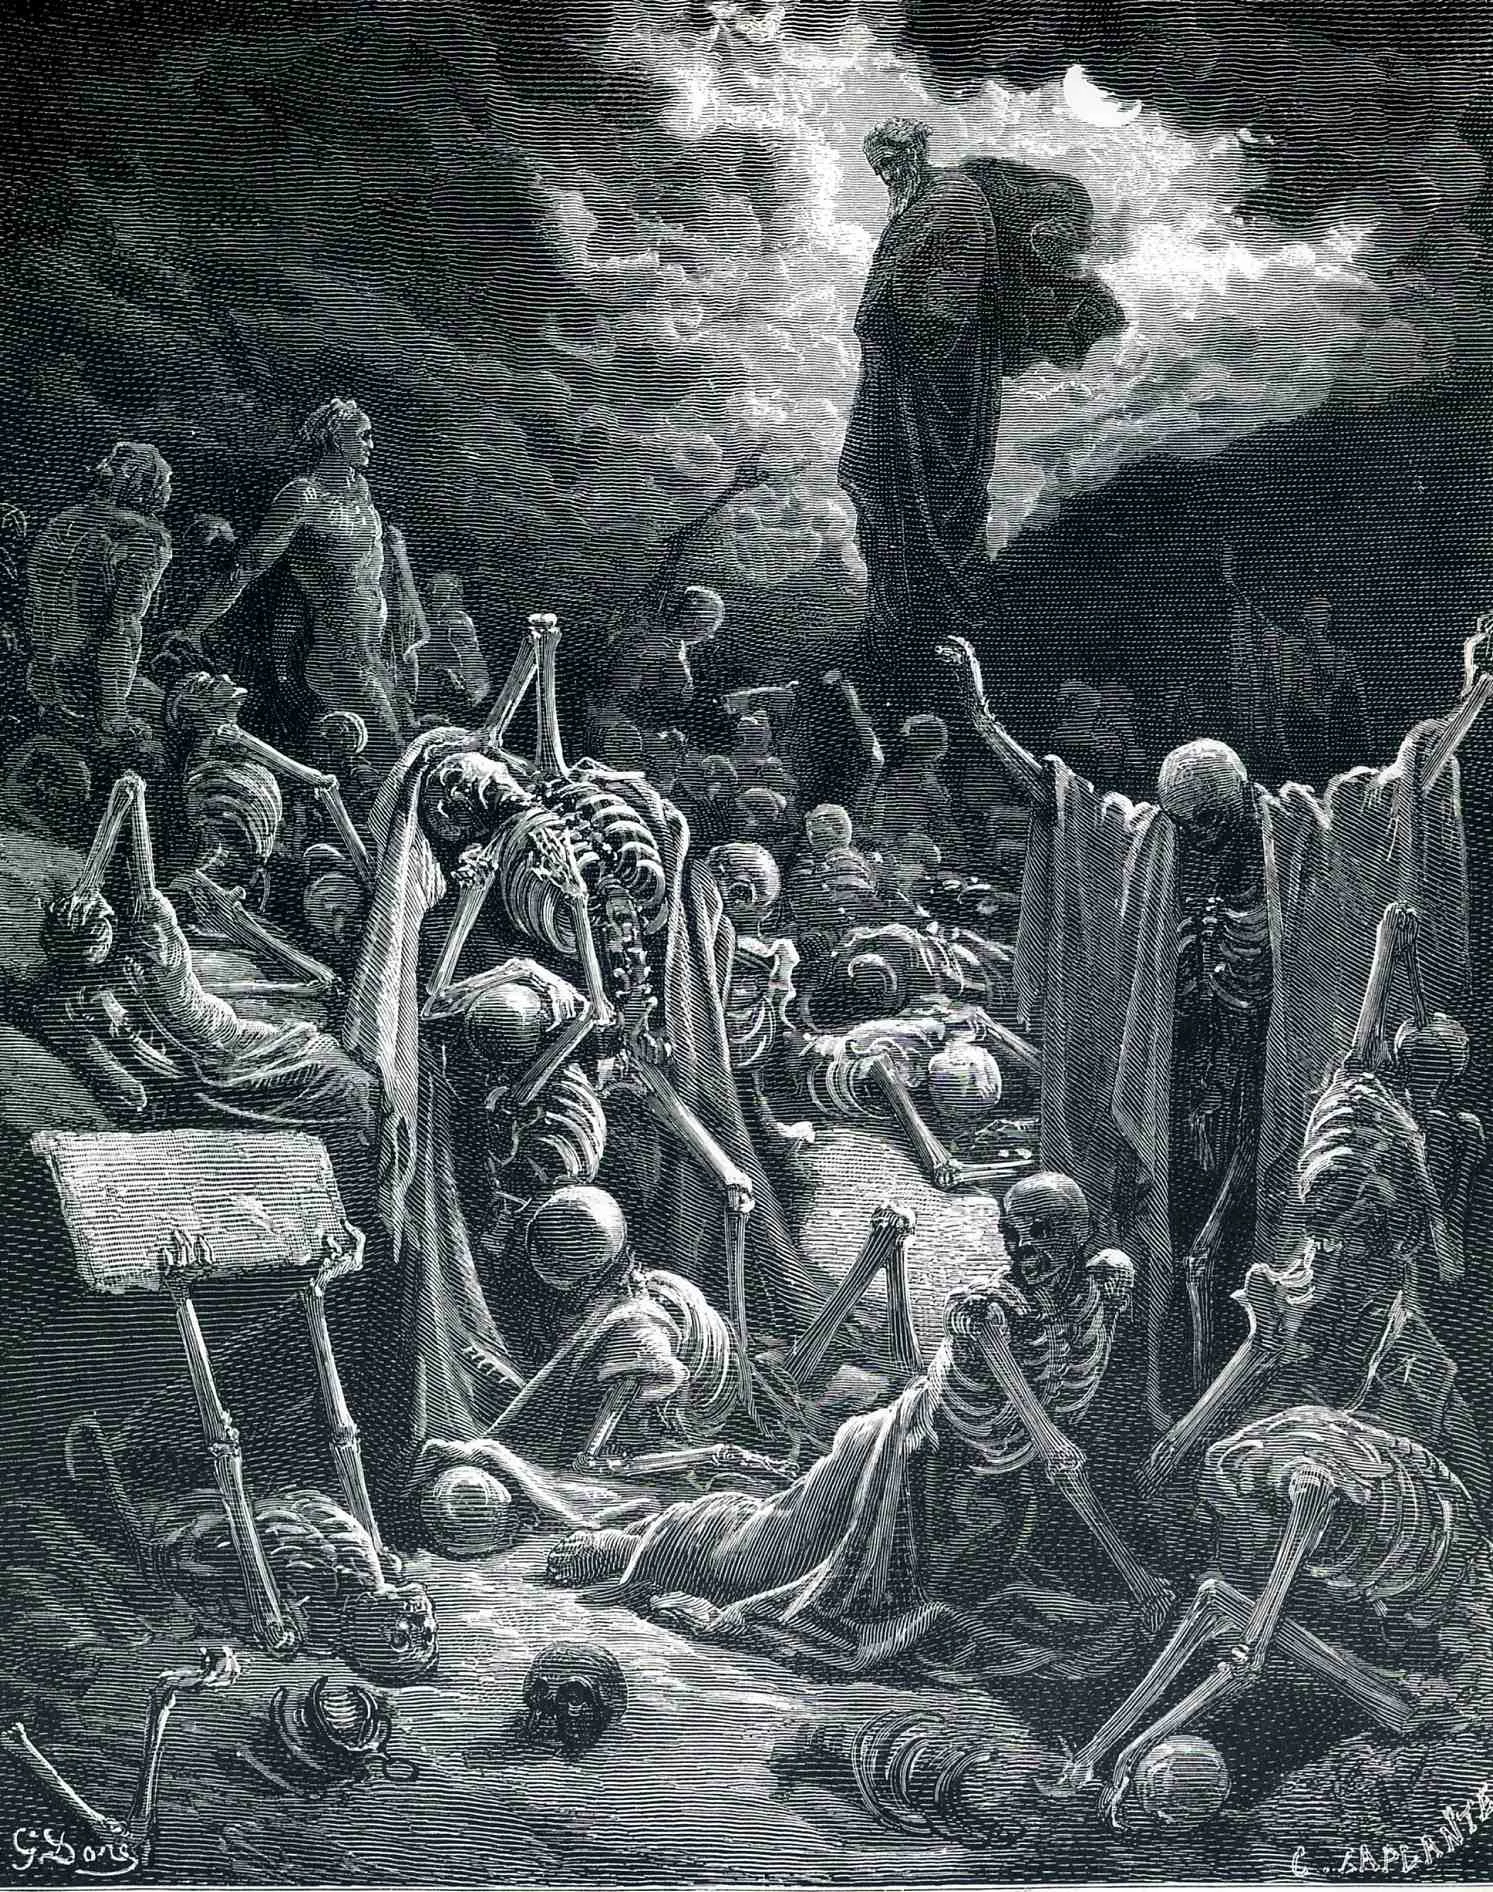 Gustave Doré, The Artists